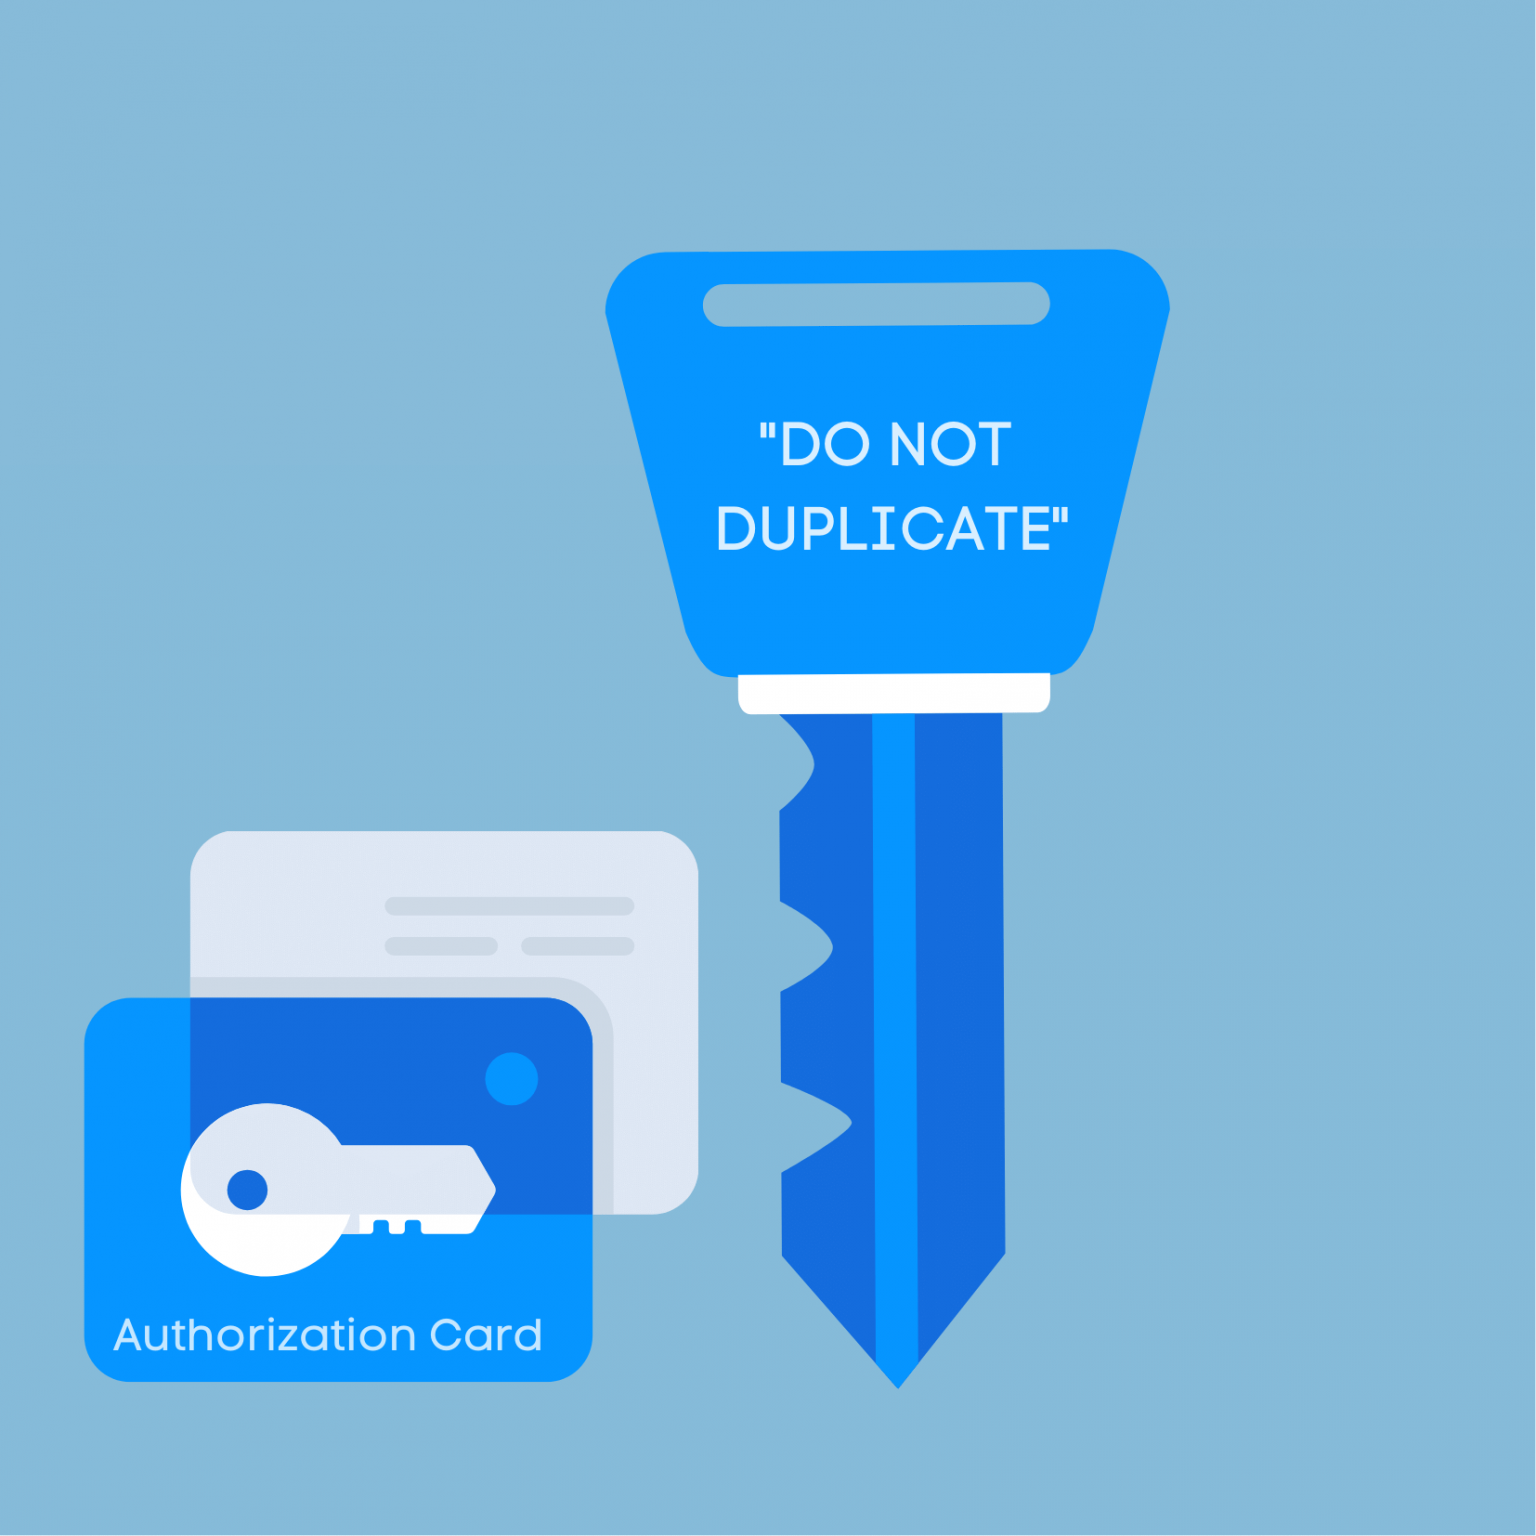 What Is a Do Not Duplicate Key